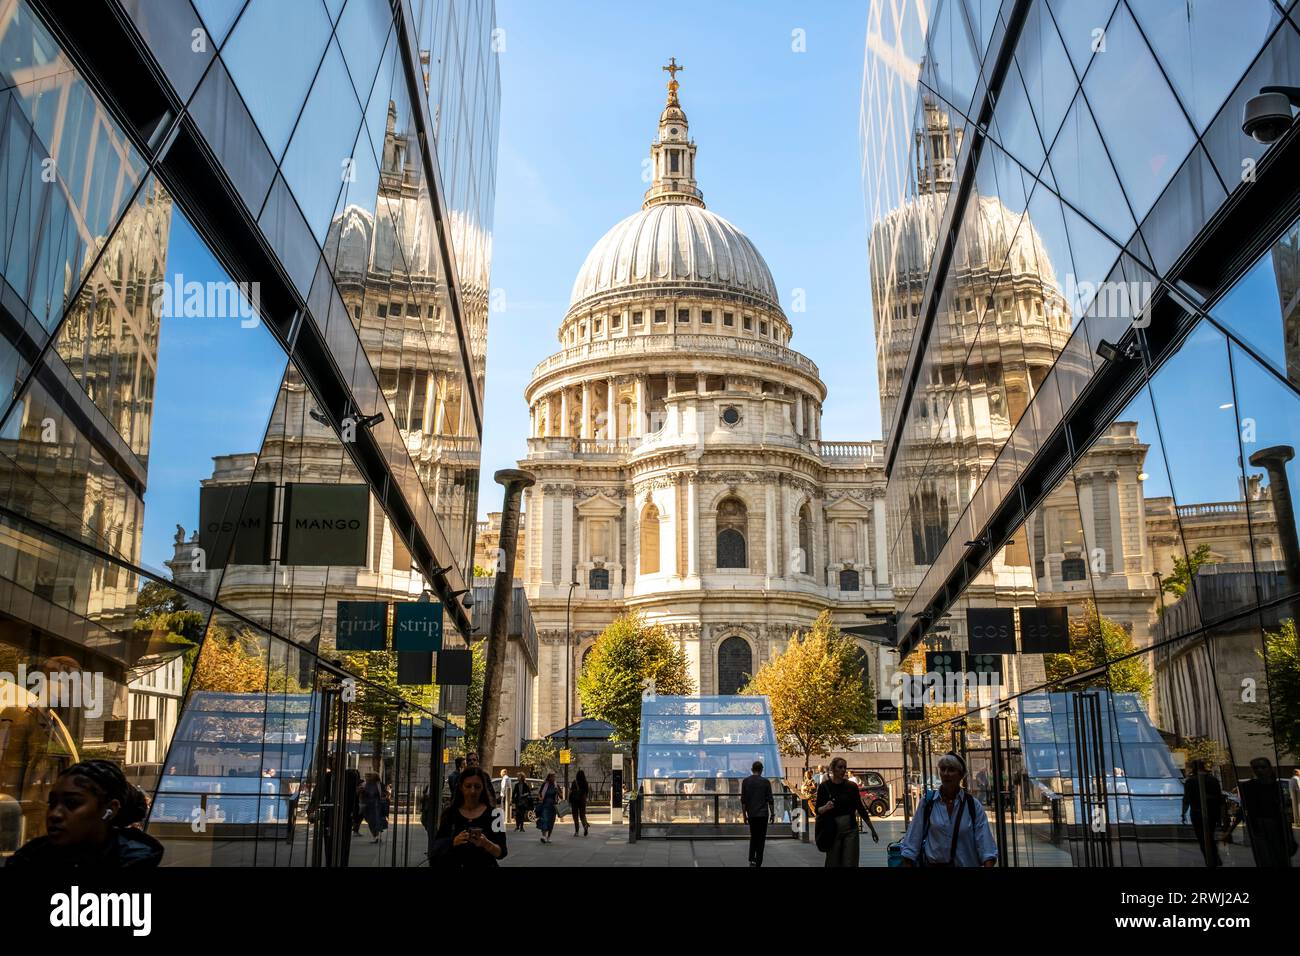 St Paul's Cathedral Reflected In The Windows Of The One New Change Shopping Centre, The City of London, London, UK. Stock Photo